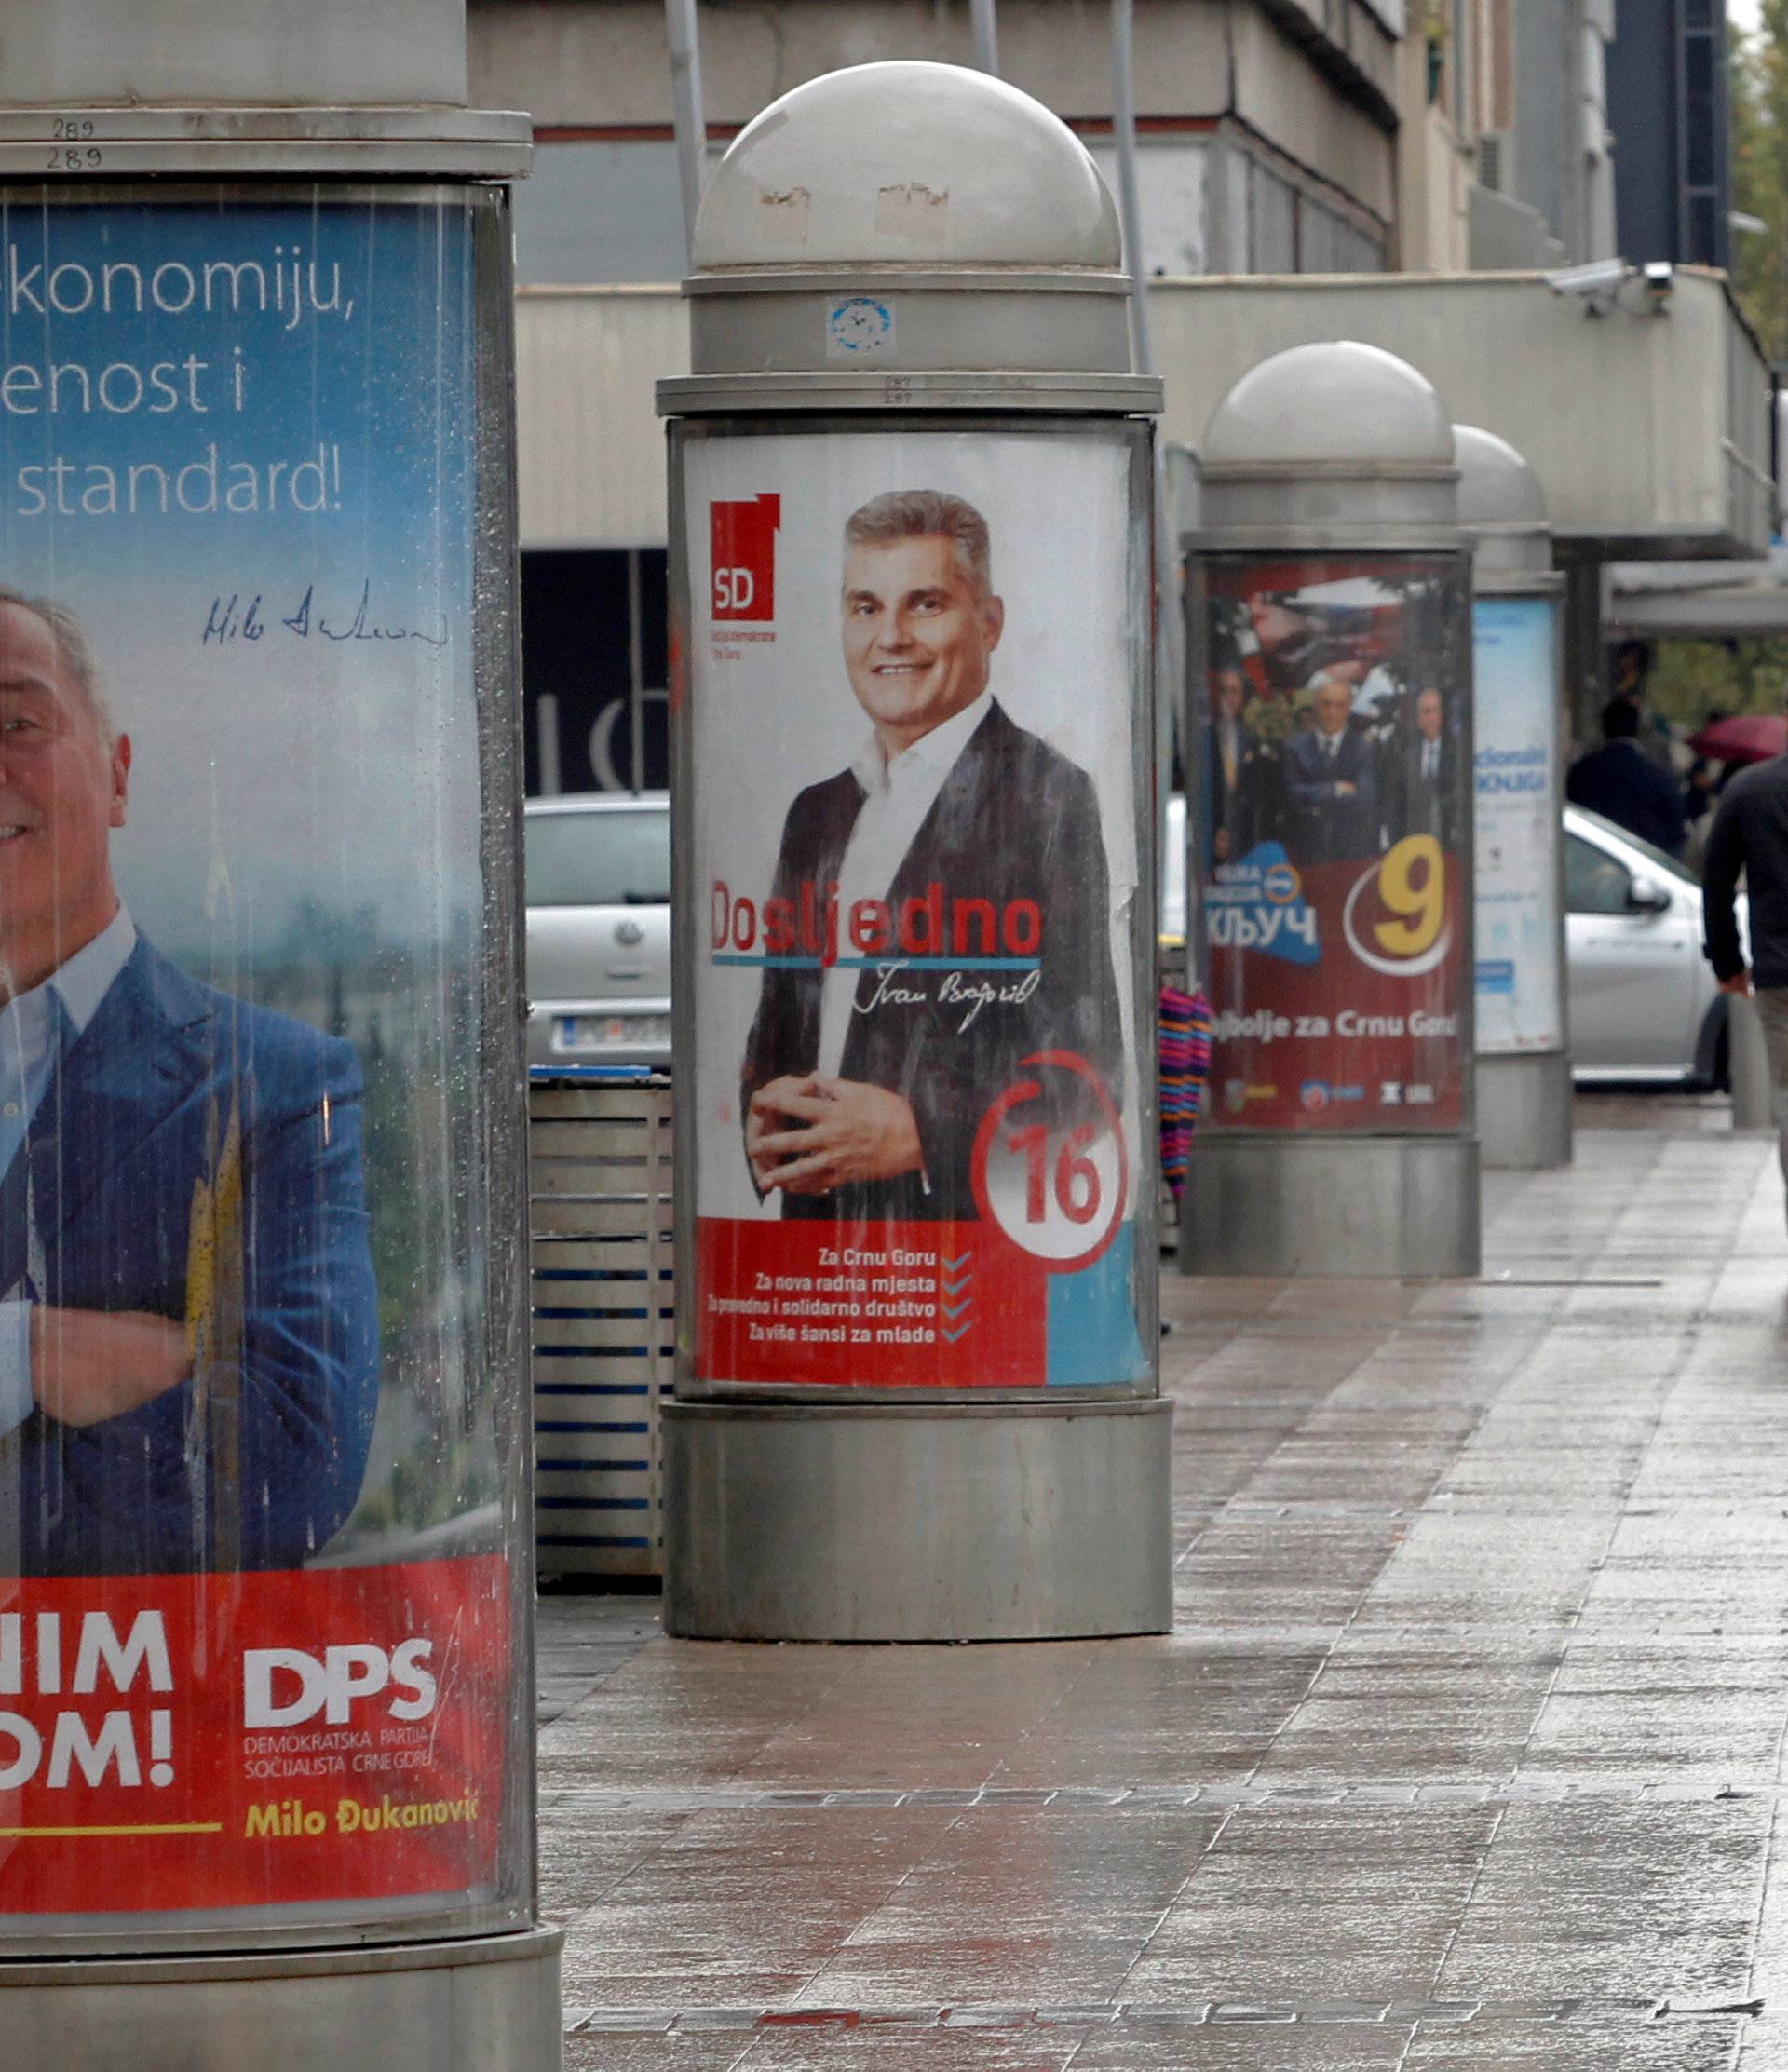 A man walks past election posters ahead of the parliamentary elections in Podgorica